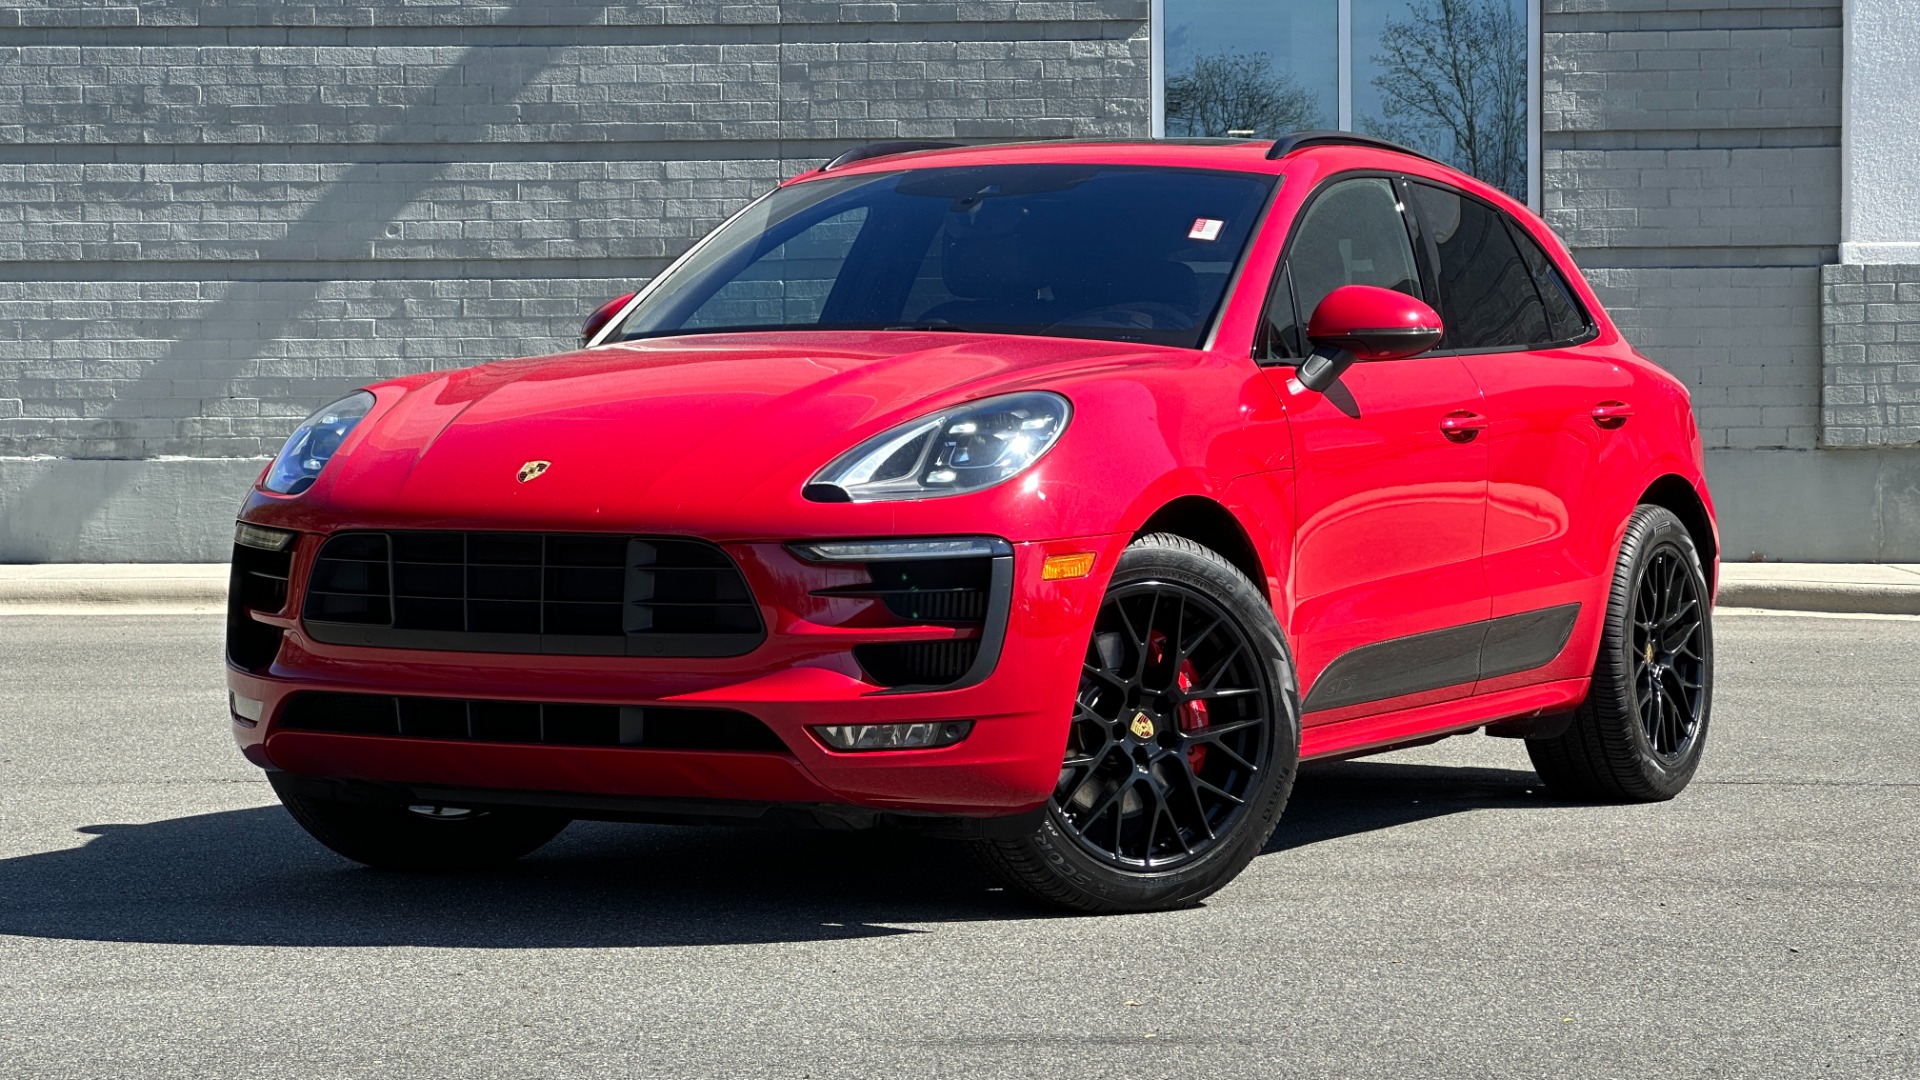 Used 2017 Porsche Macan GTS / CARBON FIBER / GTS INTERIOR / DYNAMIC LIGHTS / BOSE / SPORT WHEEL for sale Sold at Formula Imports in Charlotte NC 28227 1